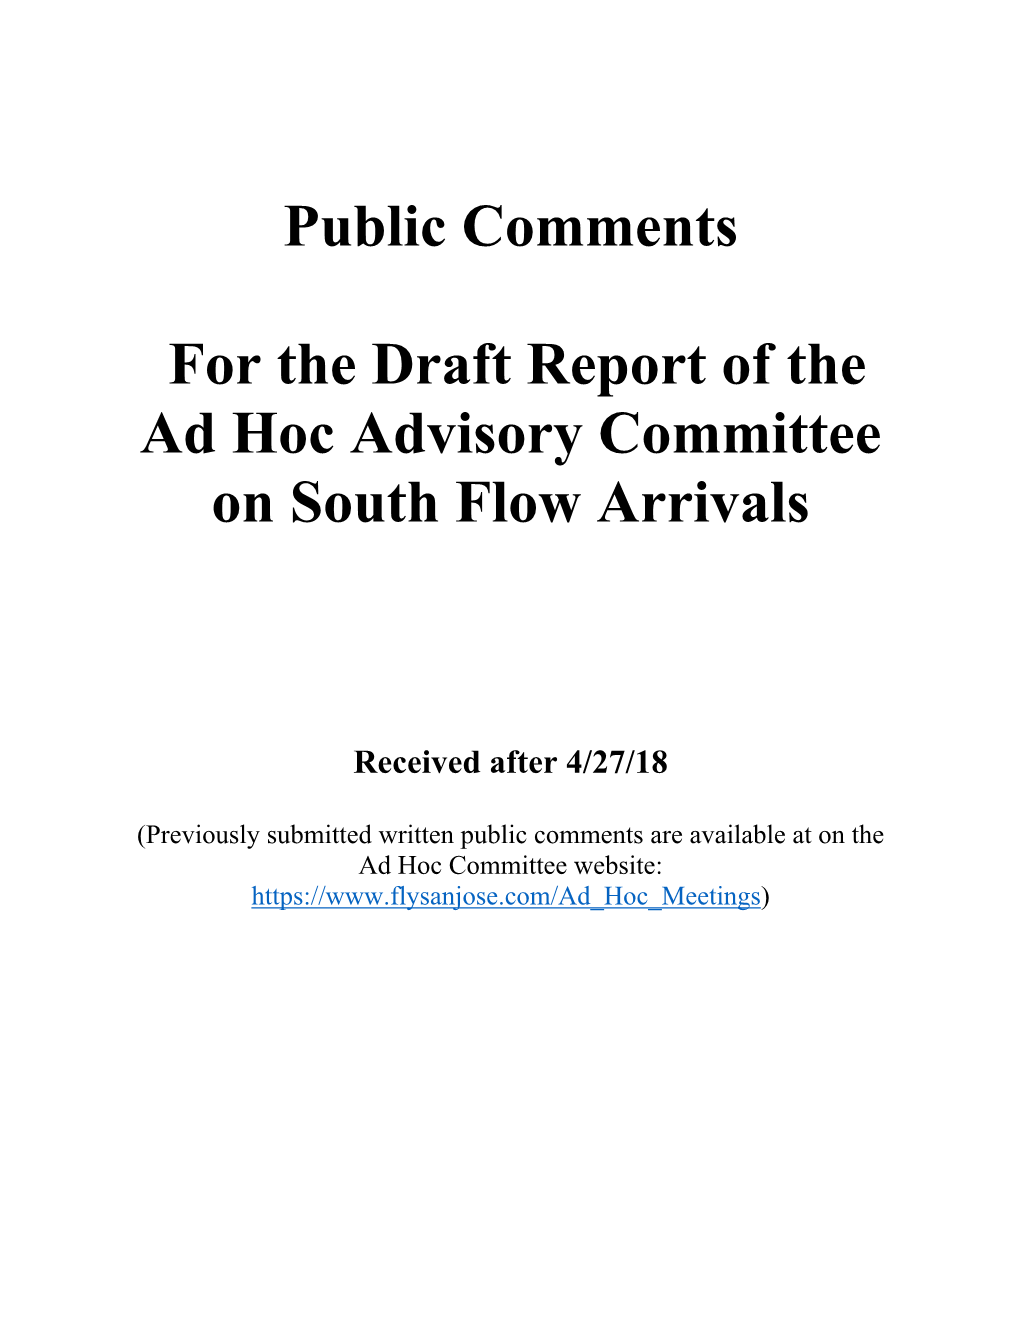 Draft of Public Comments Appendix for the Report from the Ad Hoc Advisory Committee